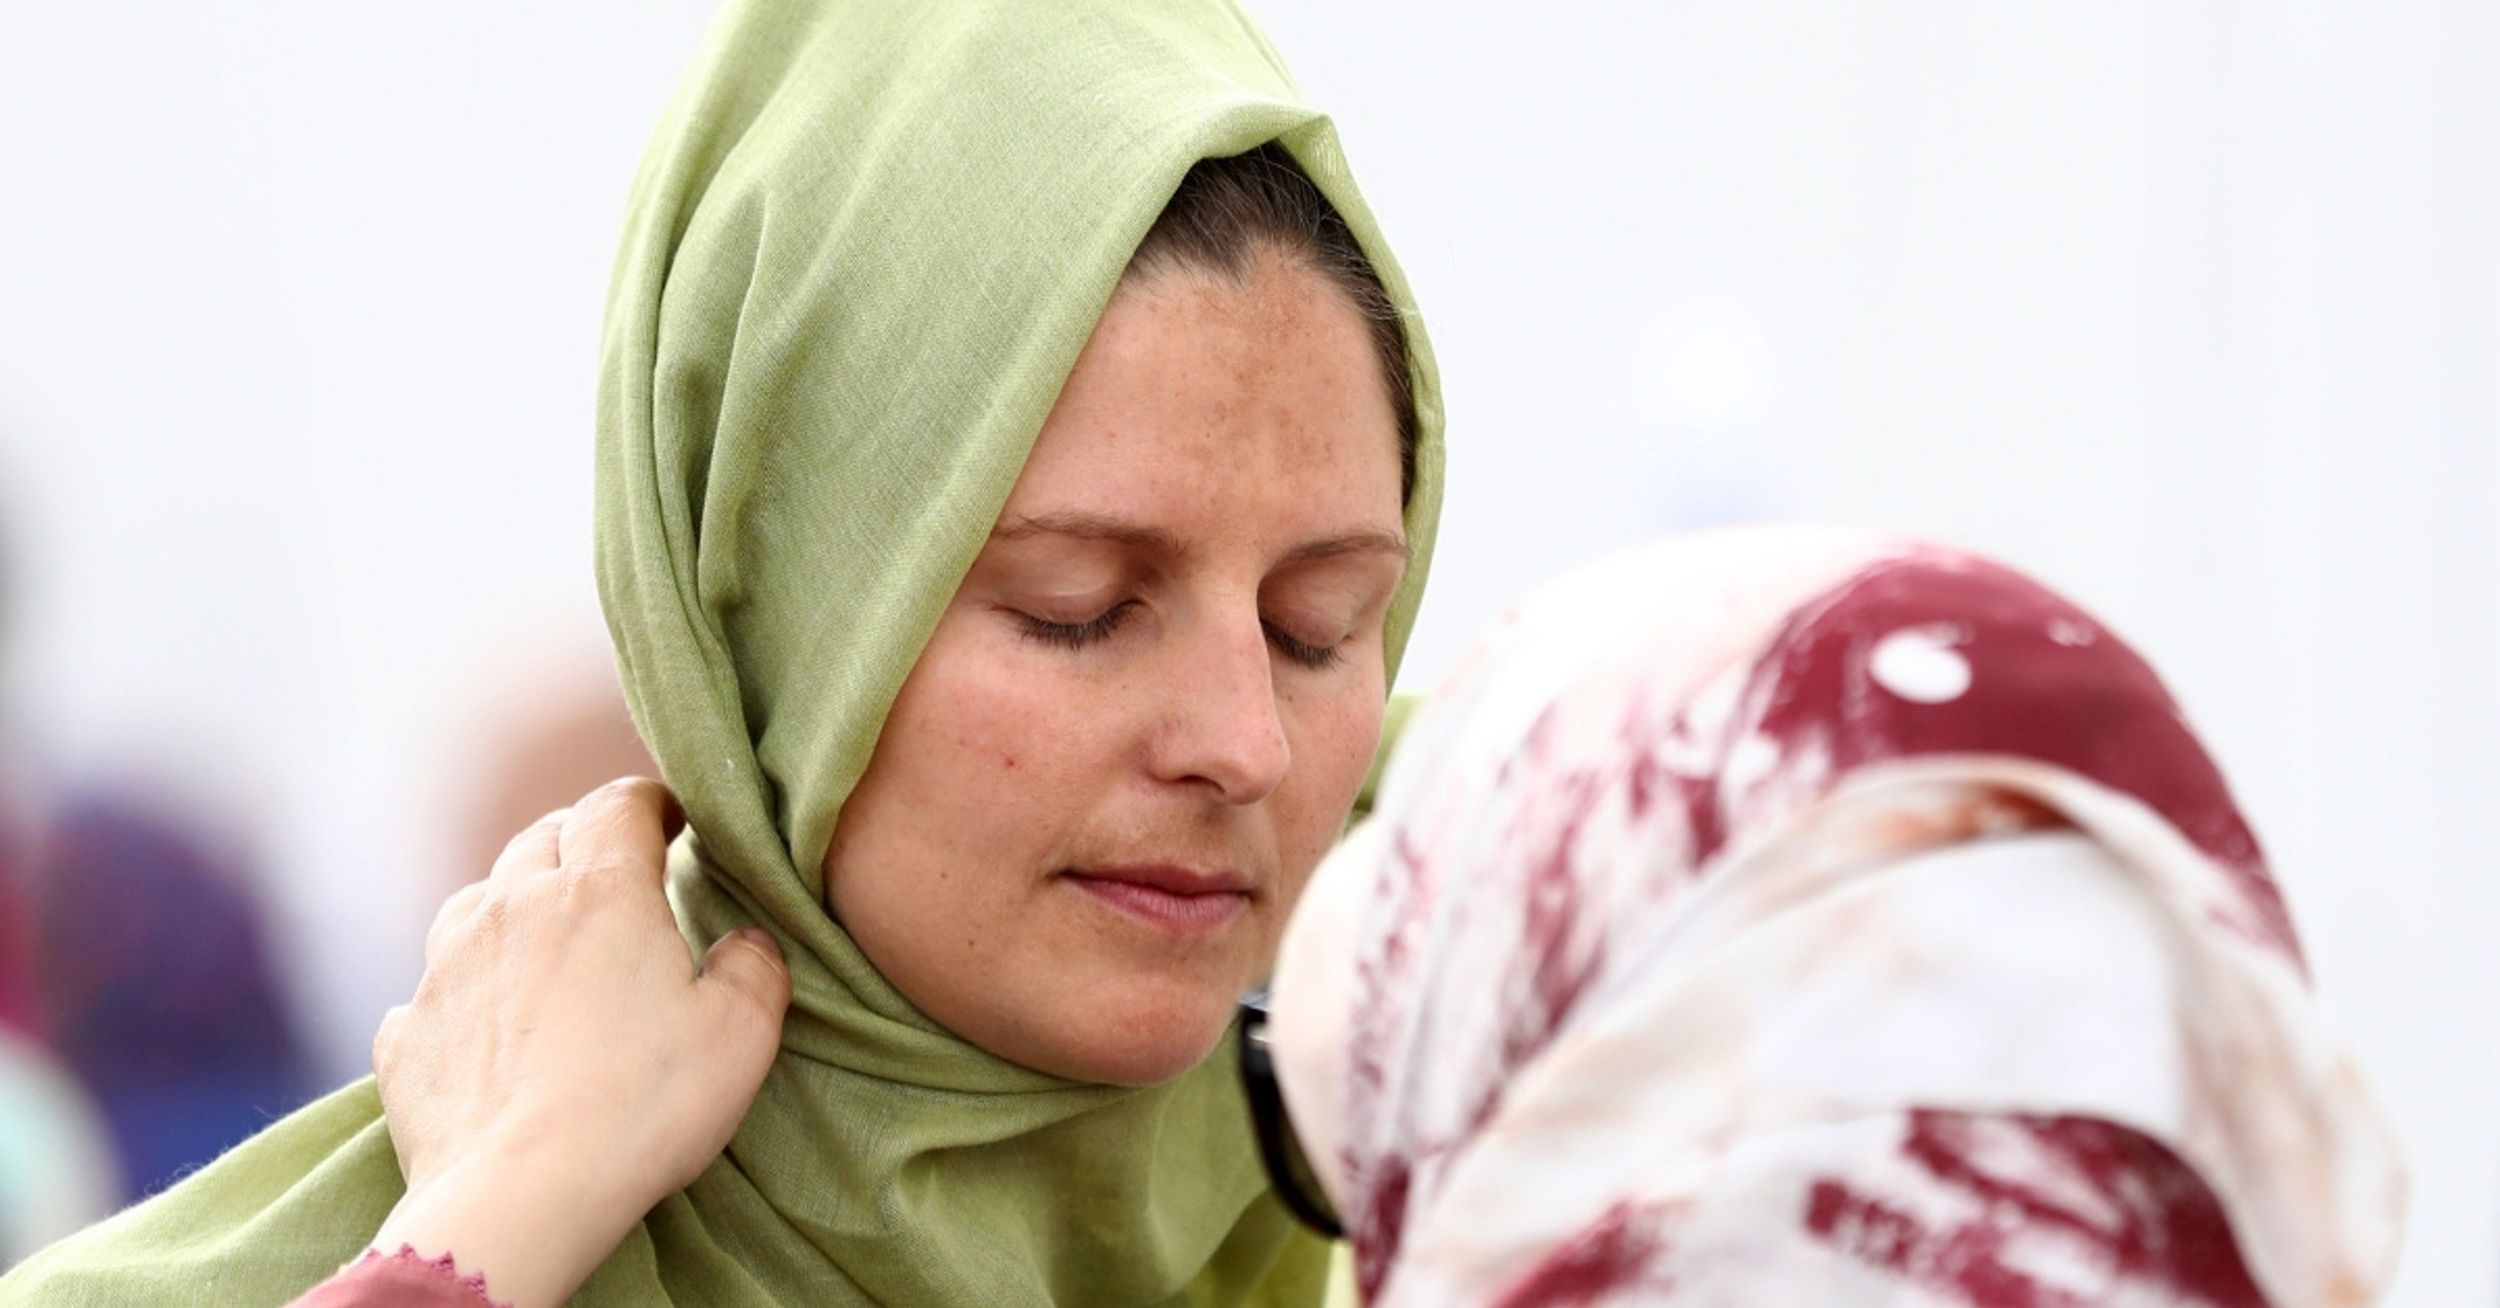 Women Of All Faiths Are Wearing Headscarves In Solidarity After New Zealand Mosque Attacks